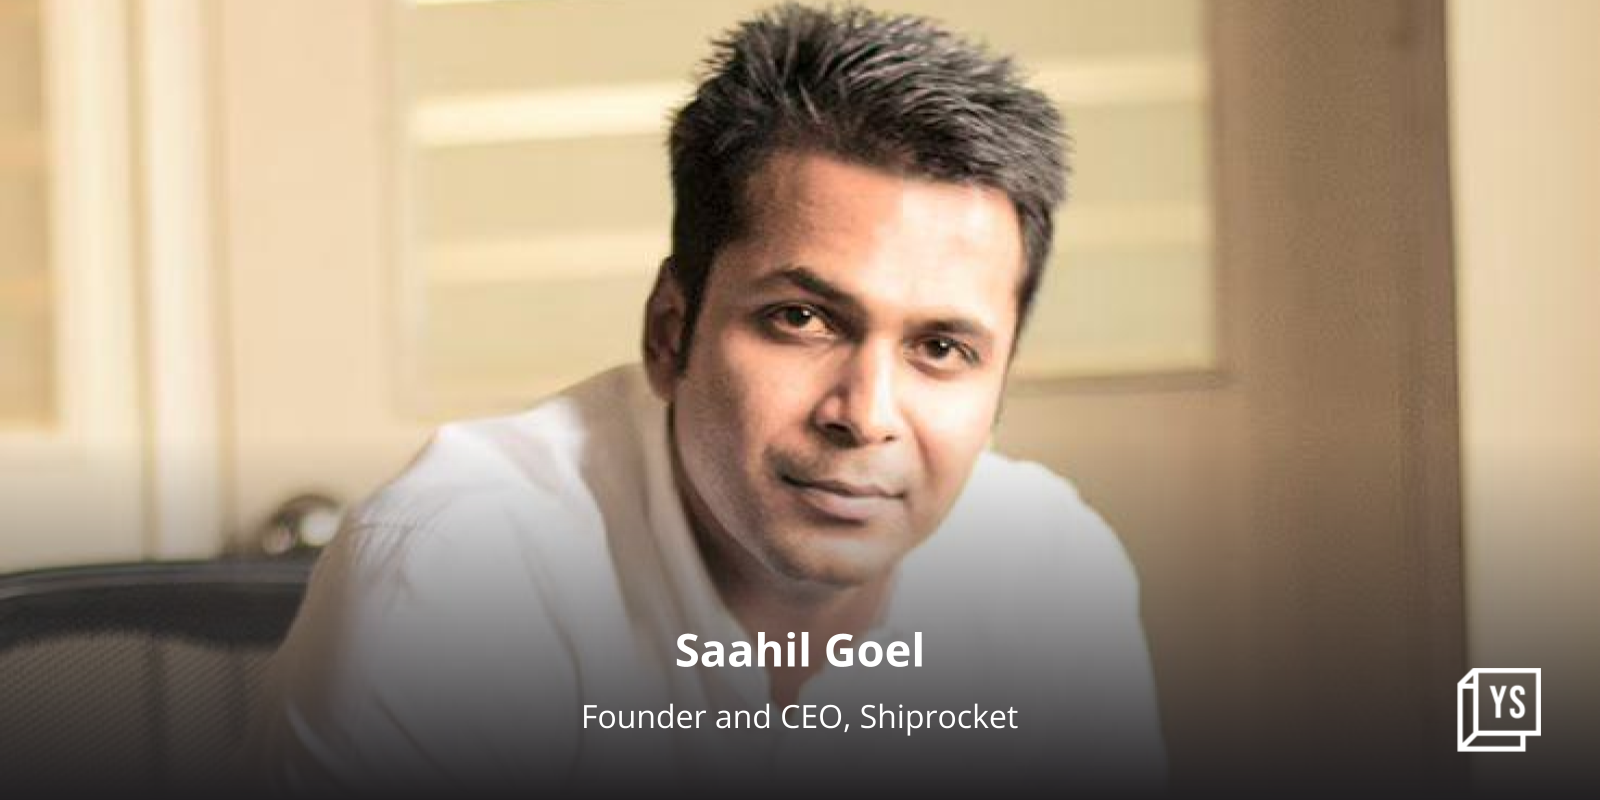 Shiprocket is more than a traditional logistics company, says CEO Saahil Goel